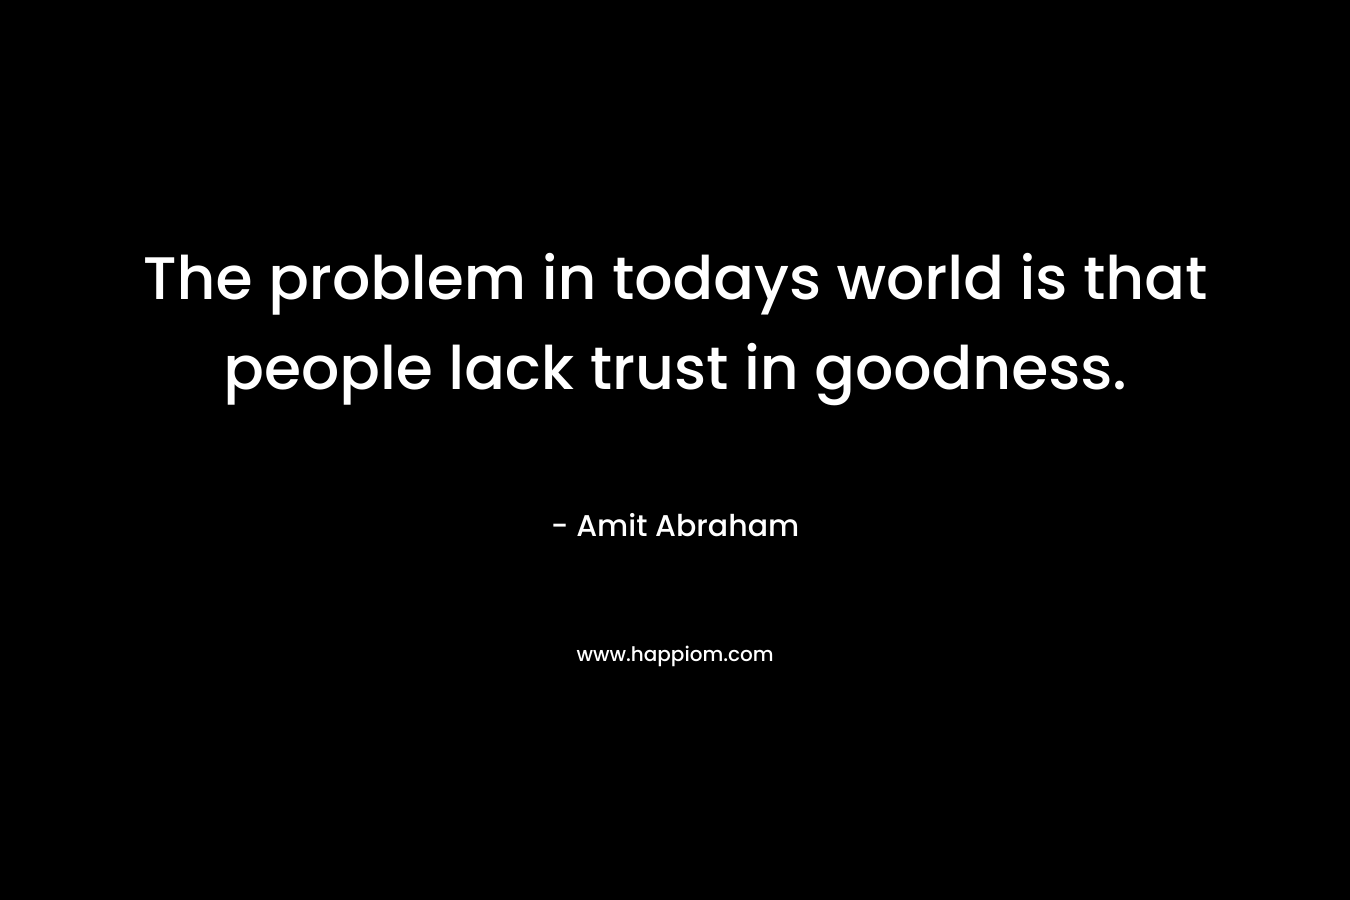 The problem in todays world is that people lack trust in goodness. – Amit Abraham